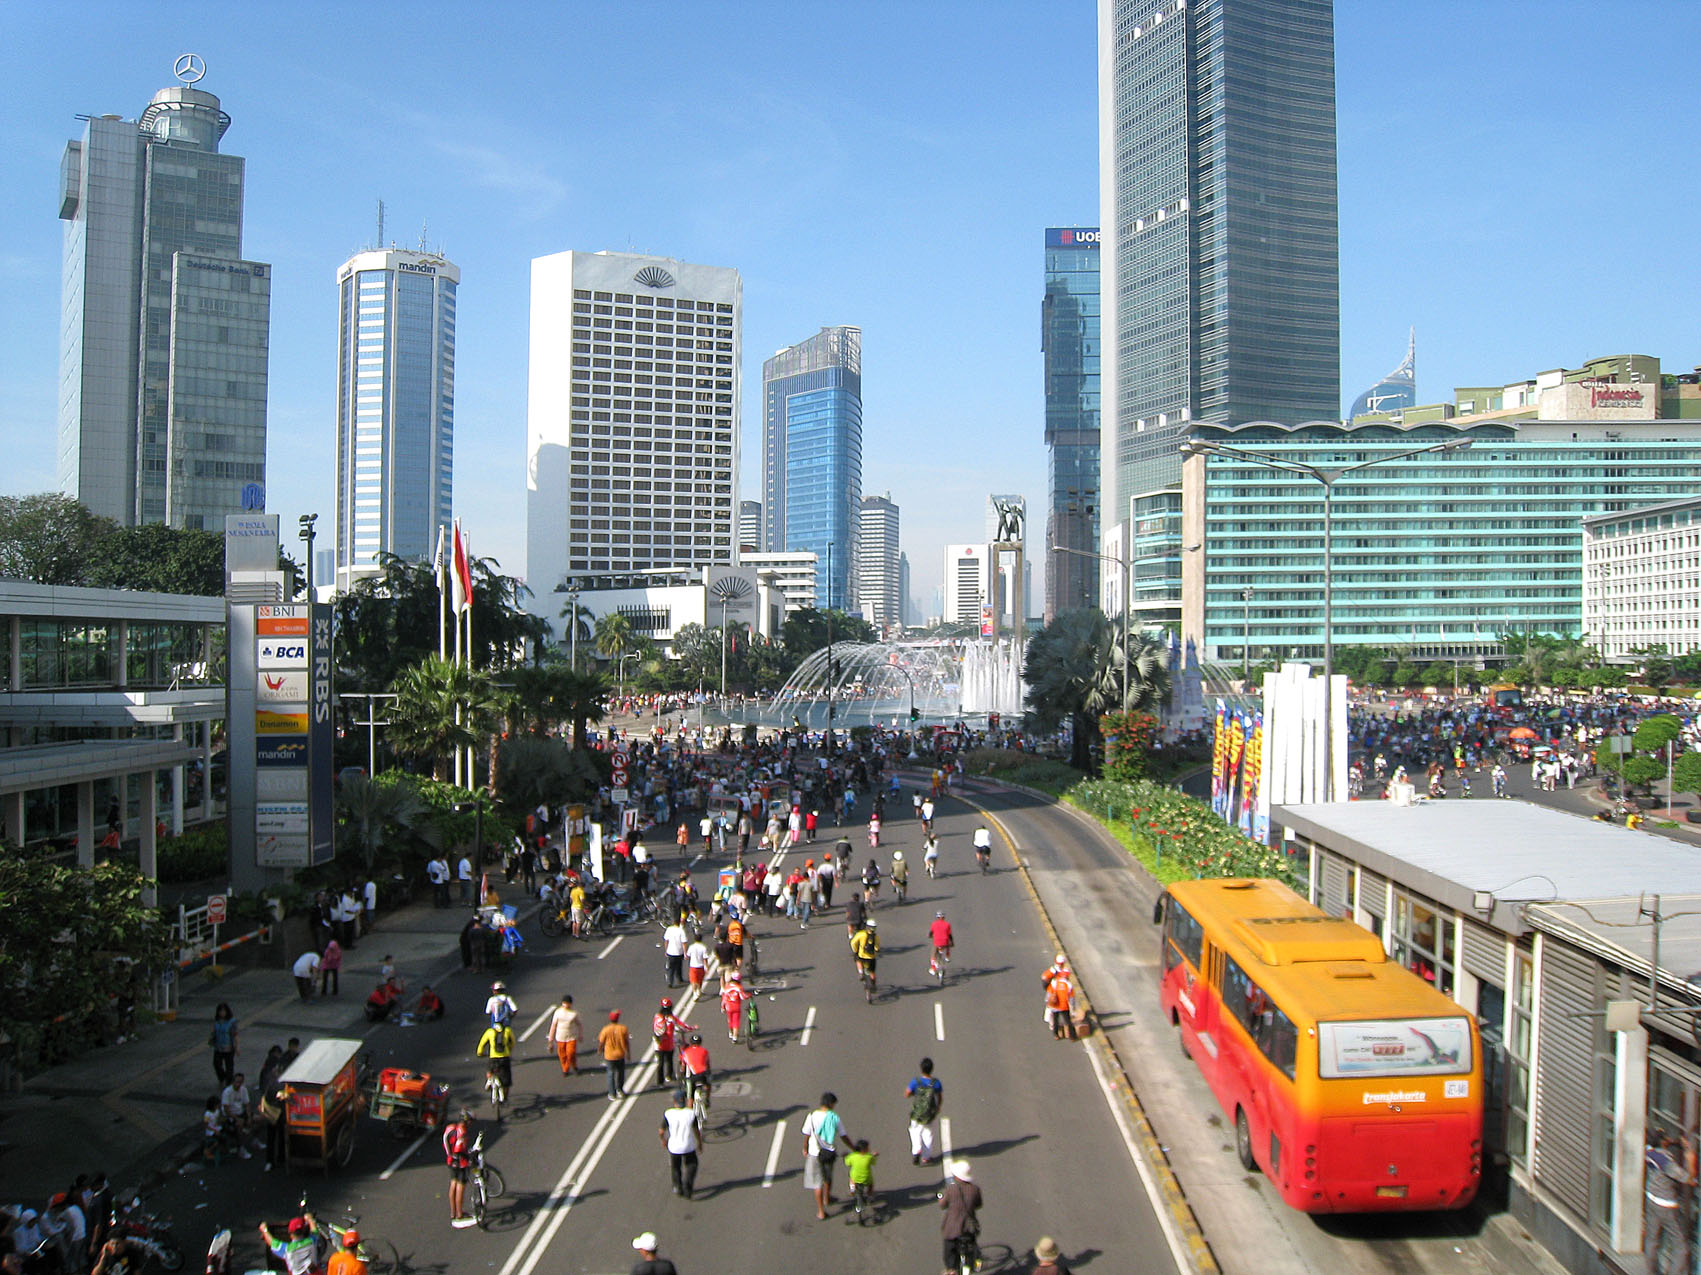 People on street with skyscrapers in the distance; Jakarta, Indonesia